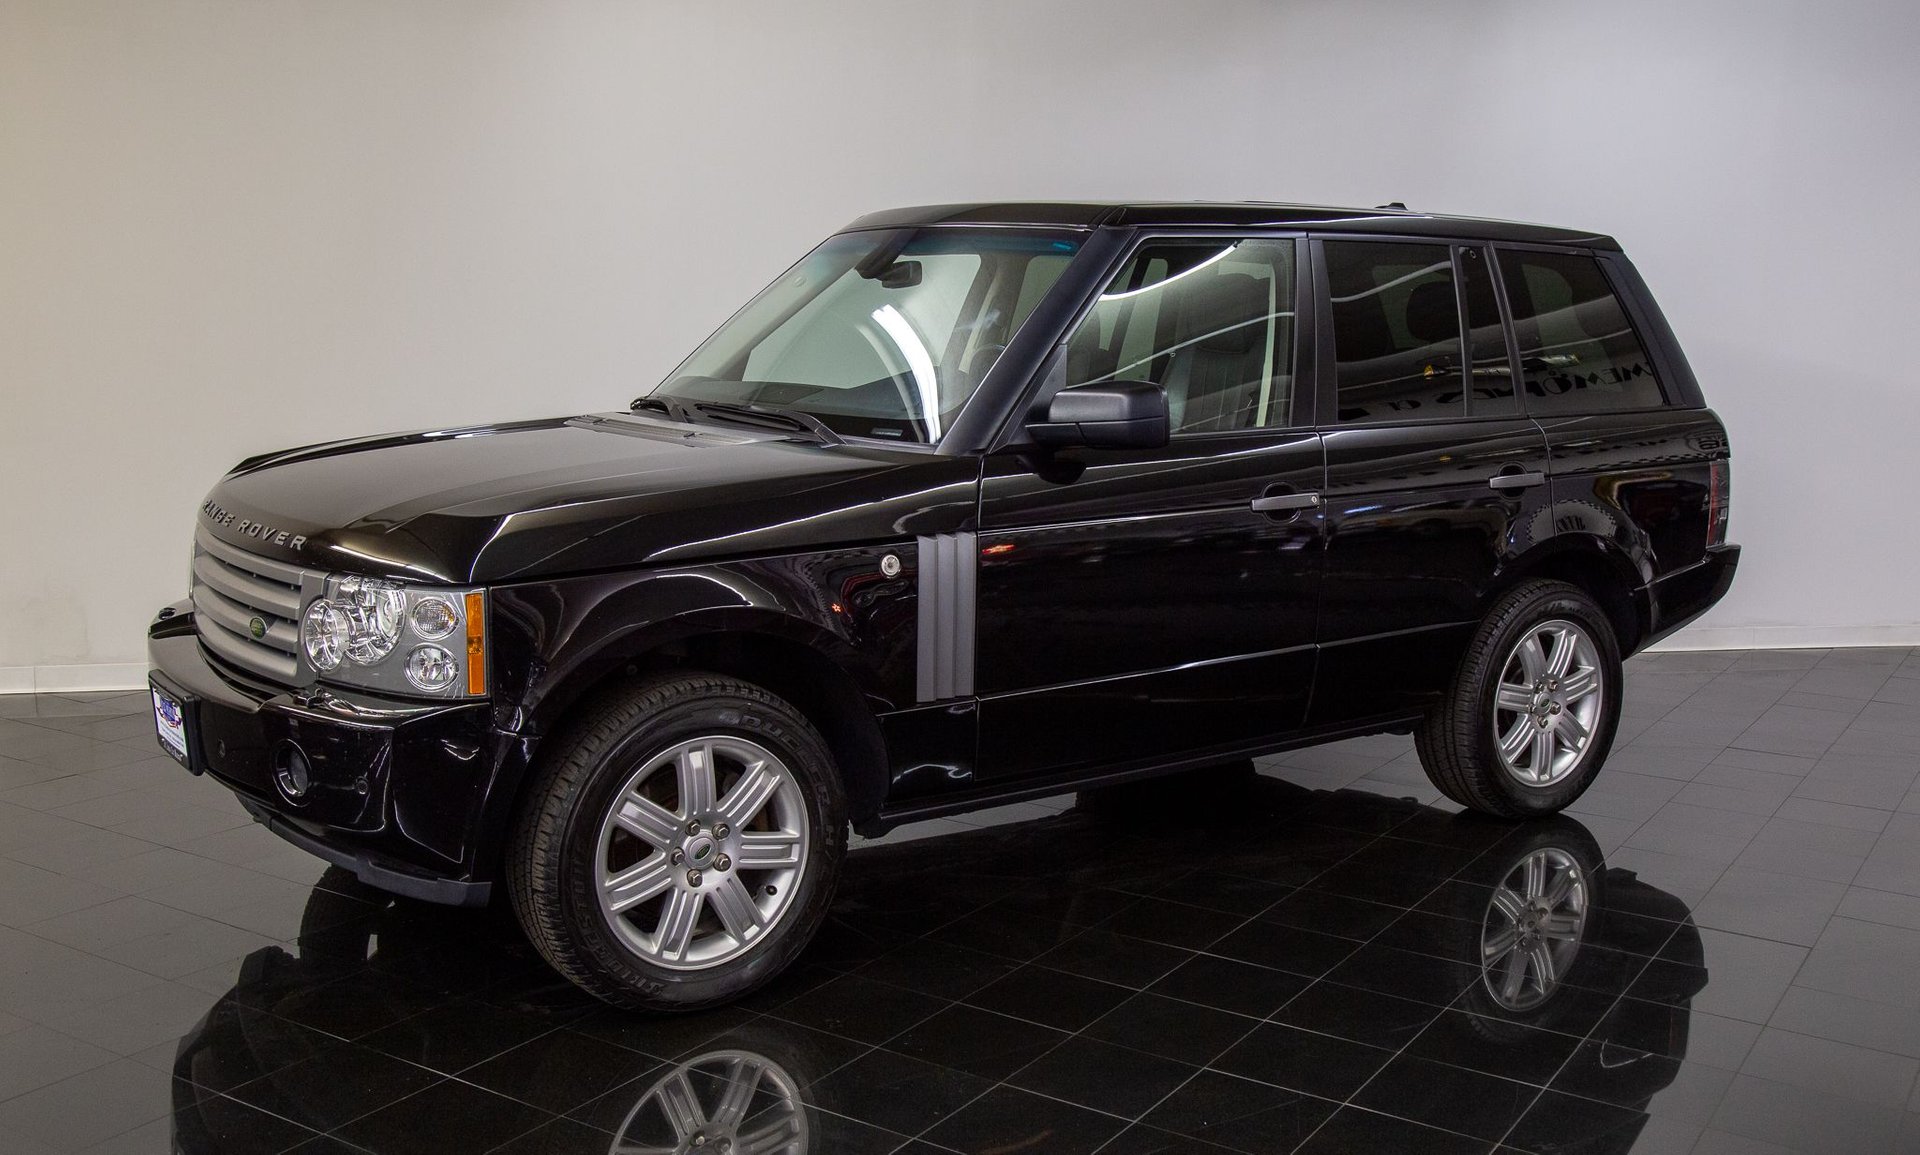 2008 Land Rover Range Rover For Sale | St. Louis Car Museum